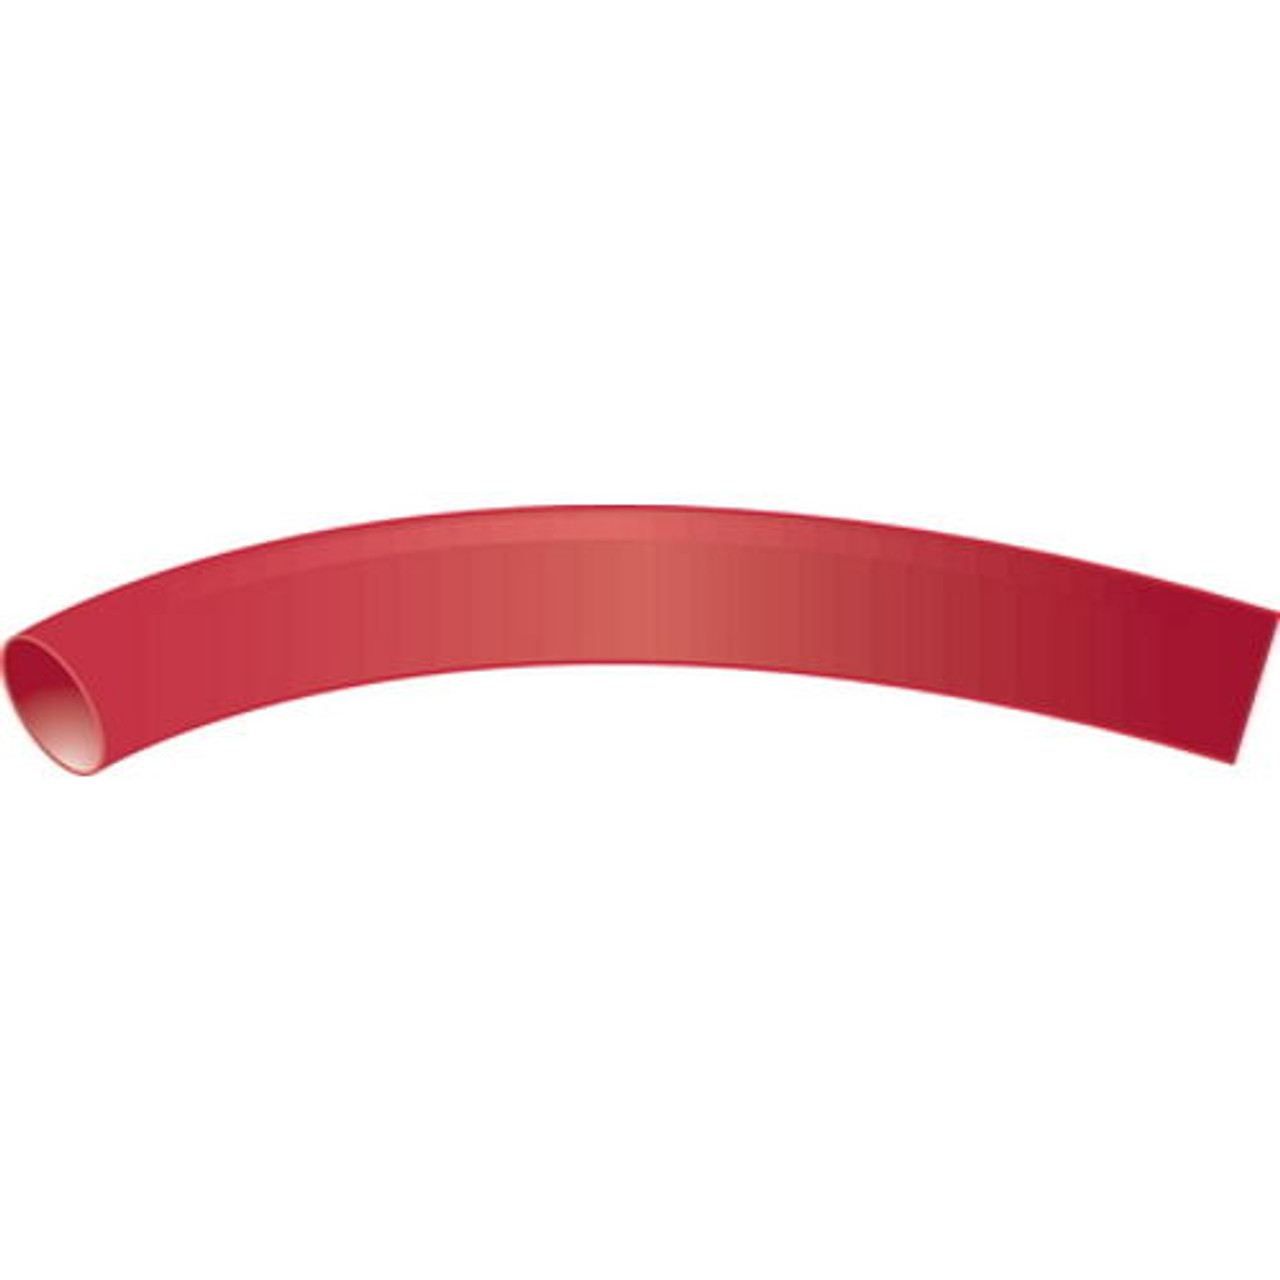 Red 1 Inch x 48 Inch 3:1 Heat Shrink Tubing with Sealant for Boats